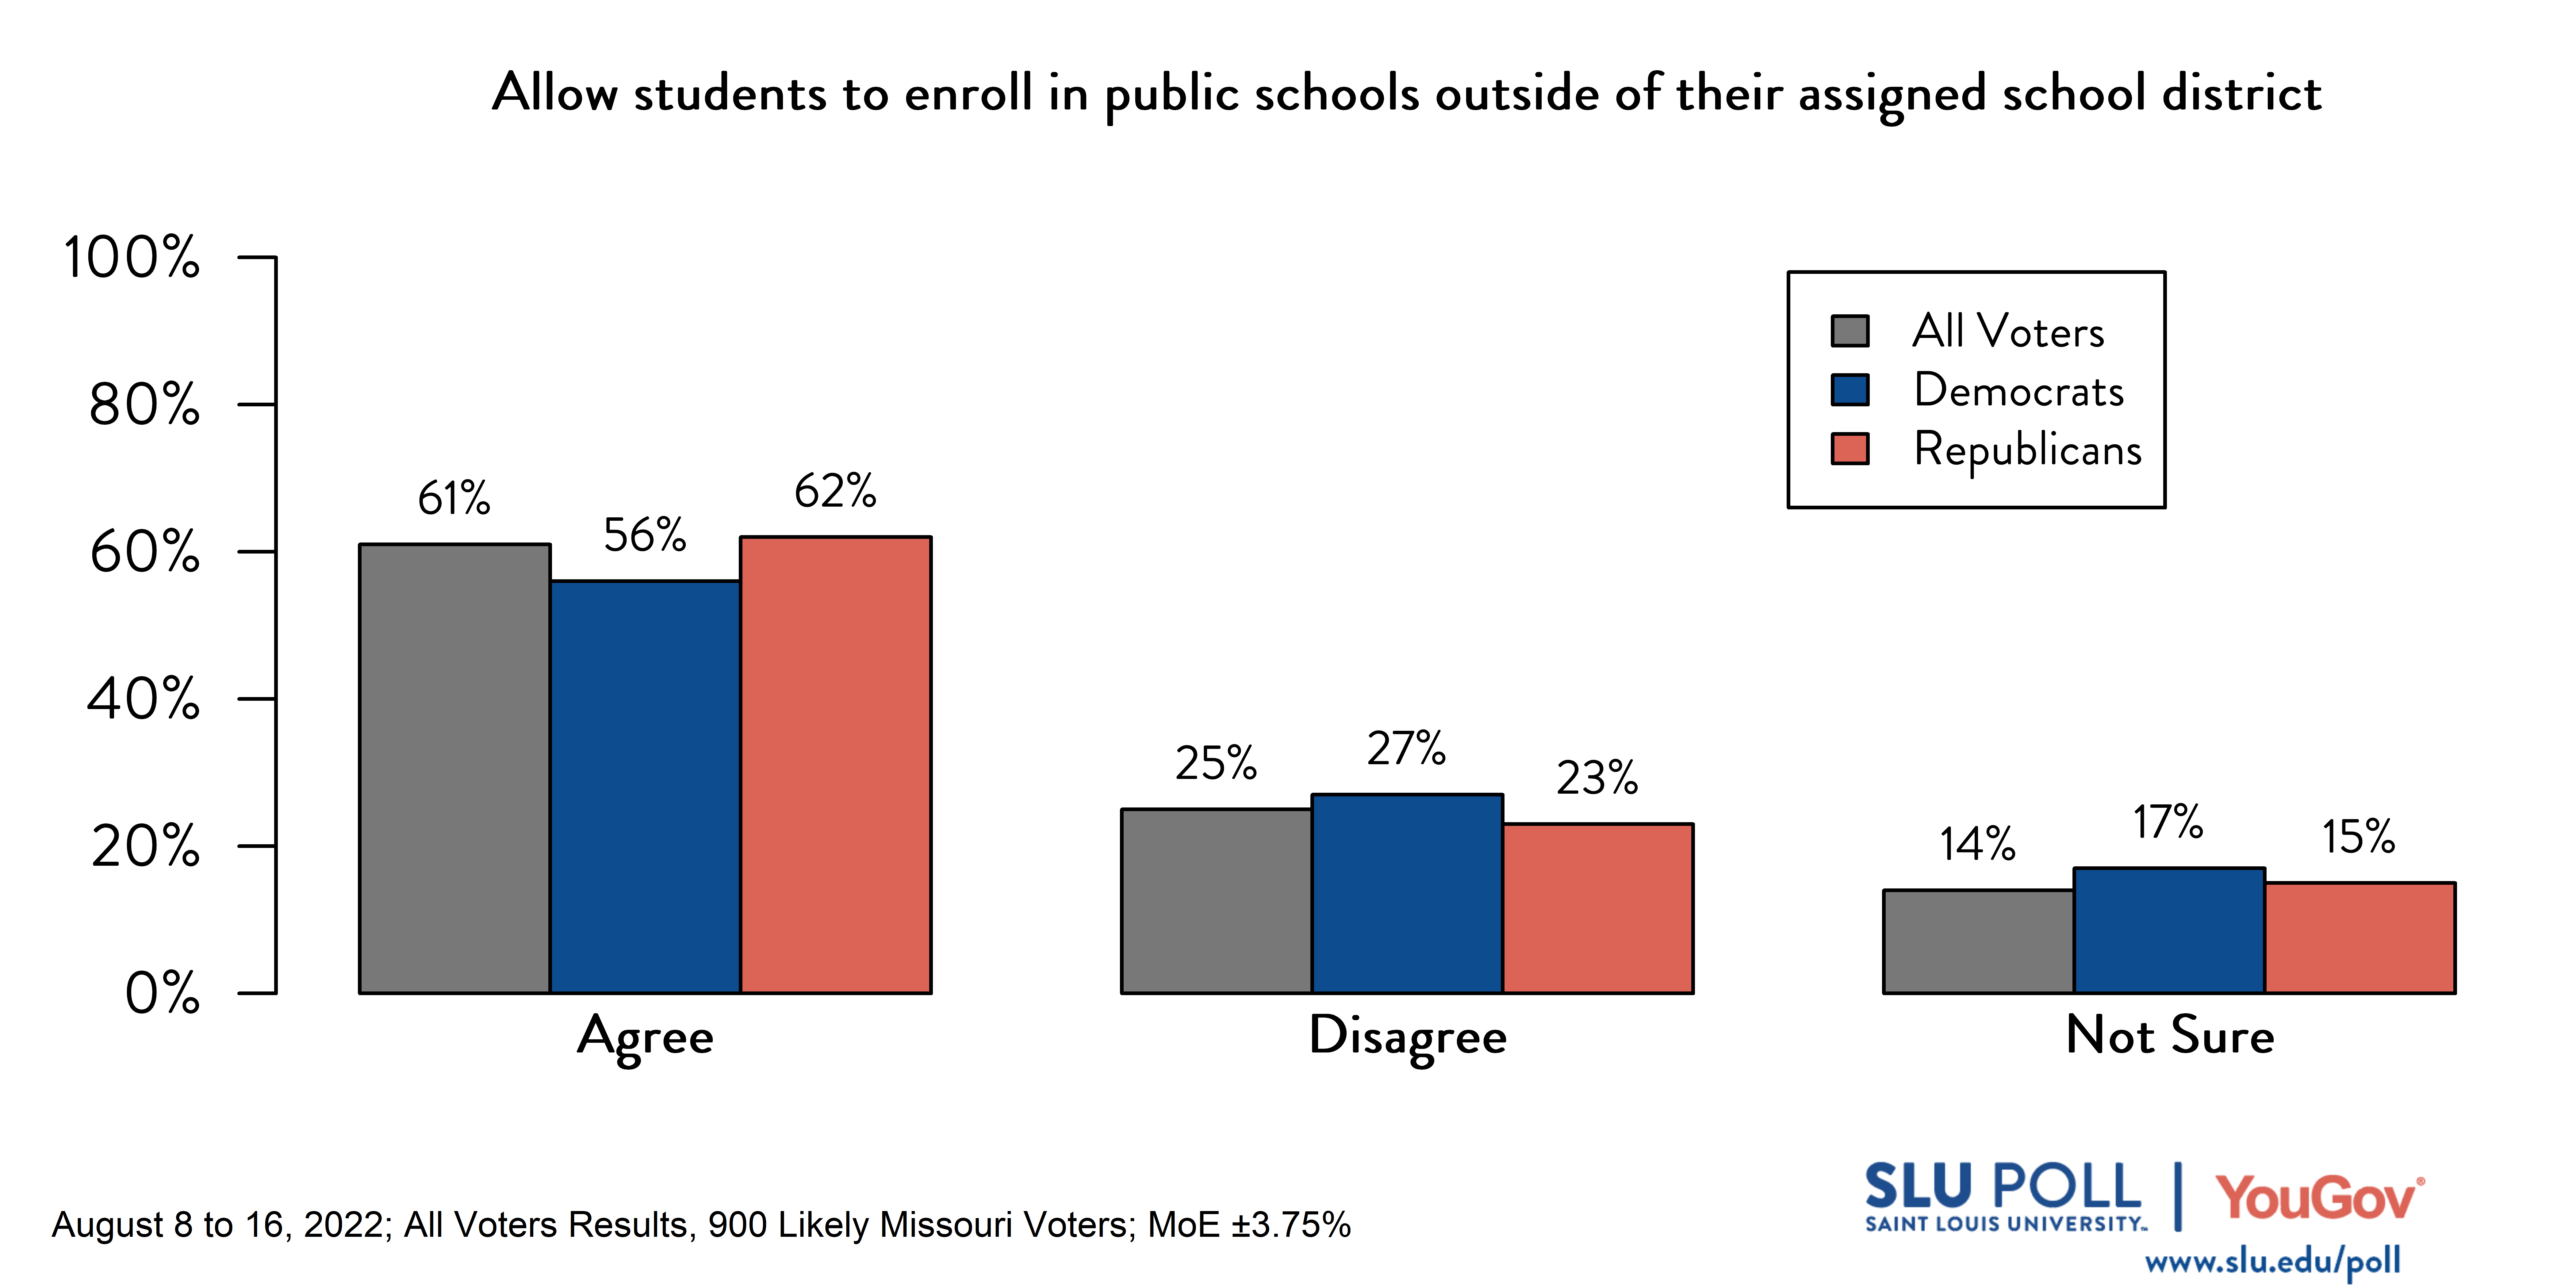 Likely voters' responses to 'Do you agree or disagree with the following statements?Allow students to enroll in public schools outside of their assigned school district.': 61% Agree, 25% Disagree, and 14% Not Sure. Democratic voters' responses: ' 56% Agree, 27% Disagree, and 17% Not Sure. Republican voters' responses: 62% Agree, 23% Disagree, and 15% Not Sure.